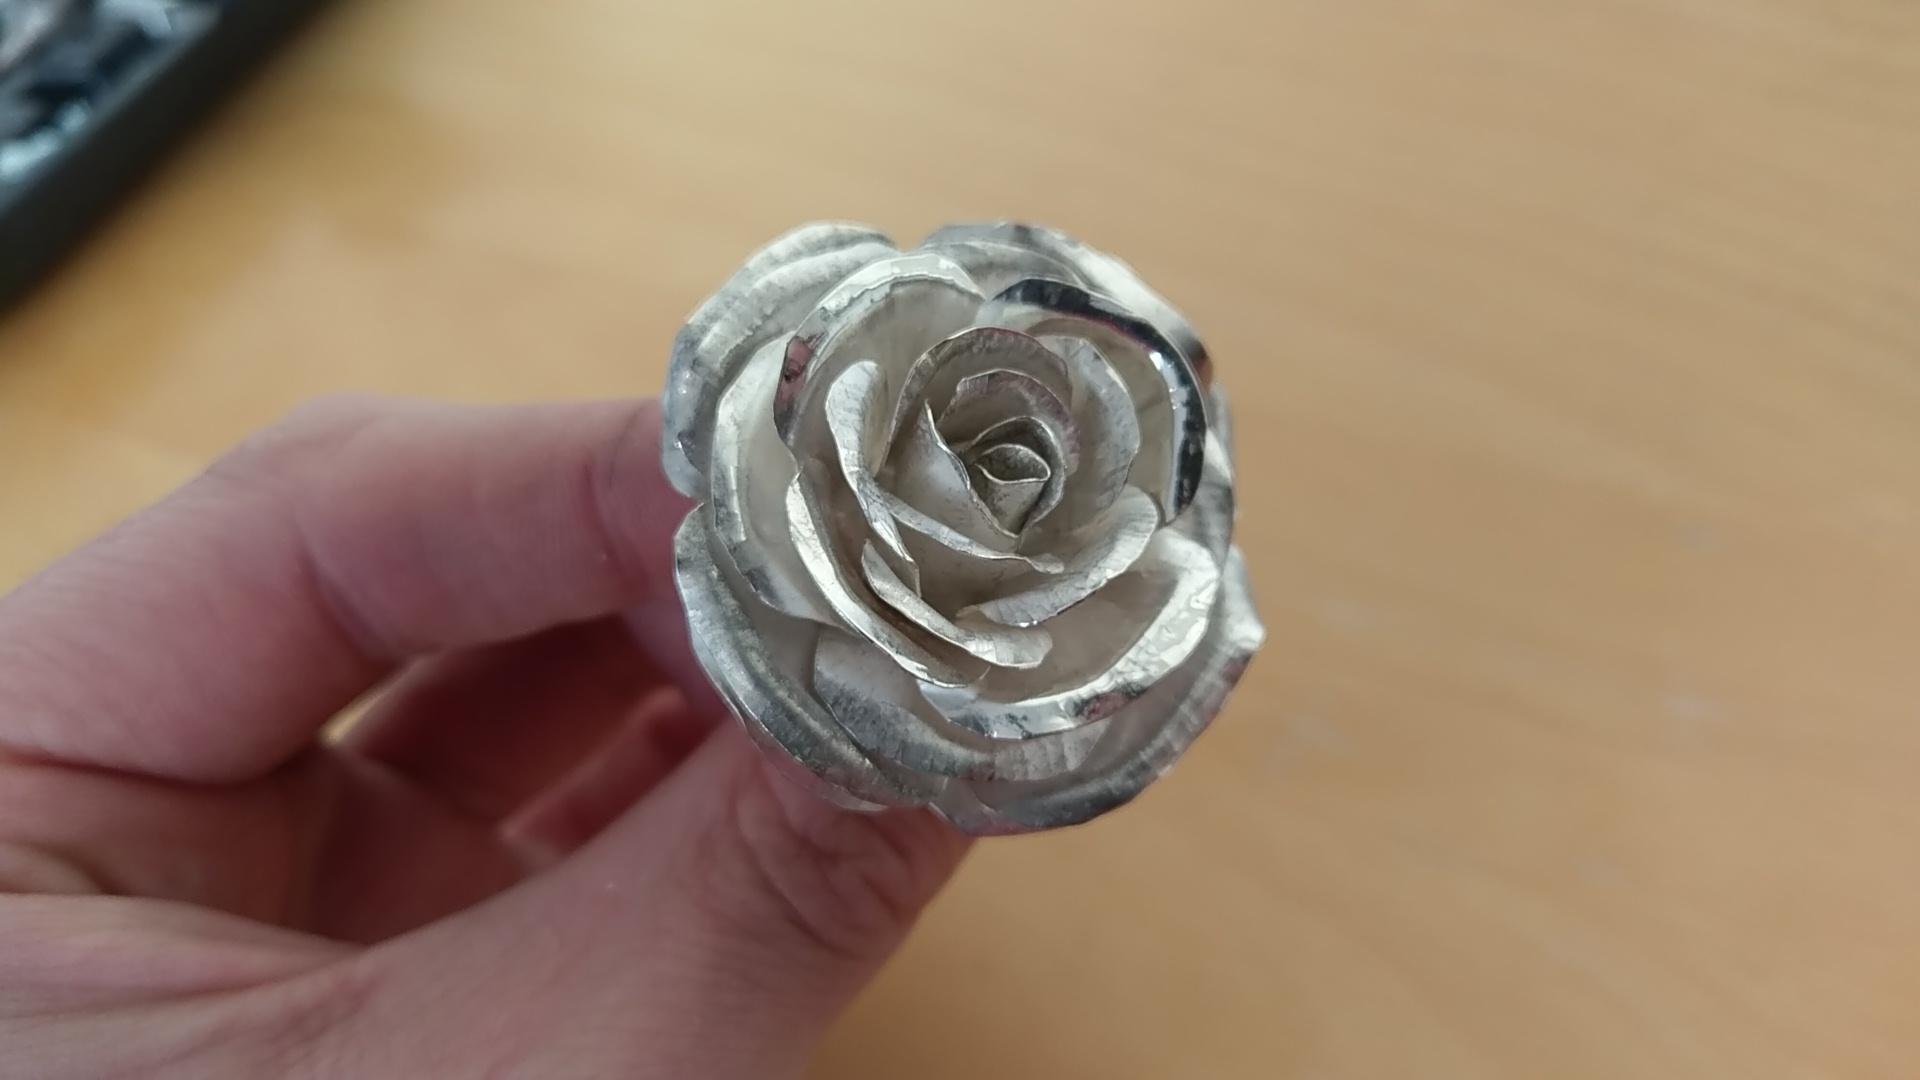 Roses Made Of Silver - HD Wallpaper 